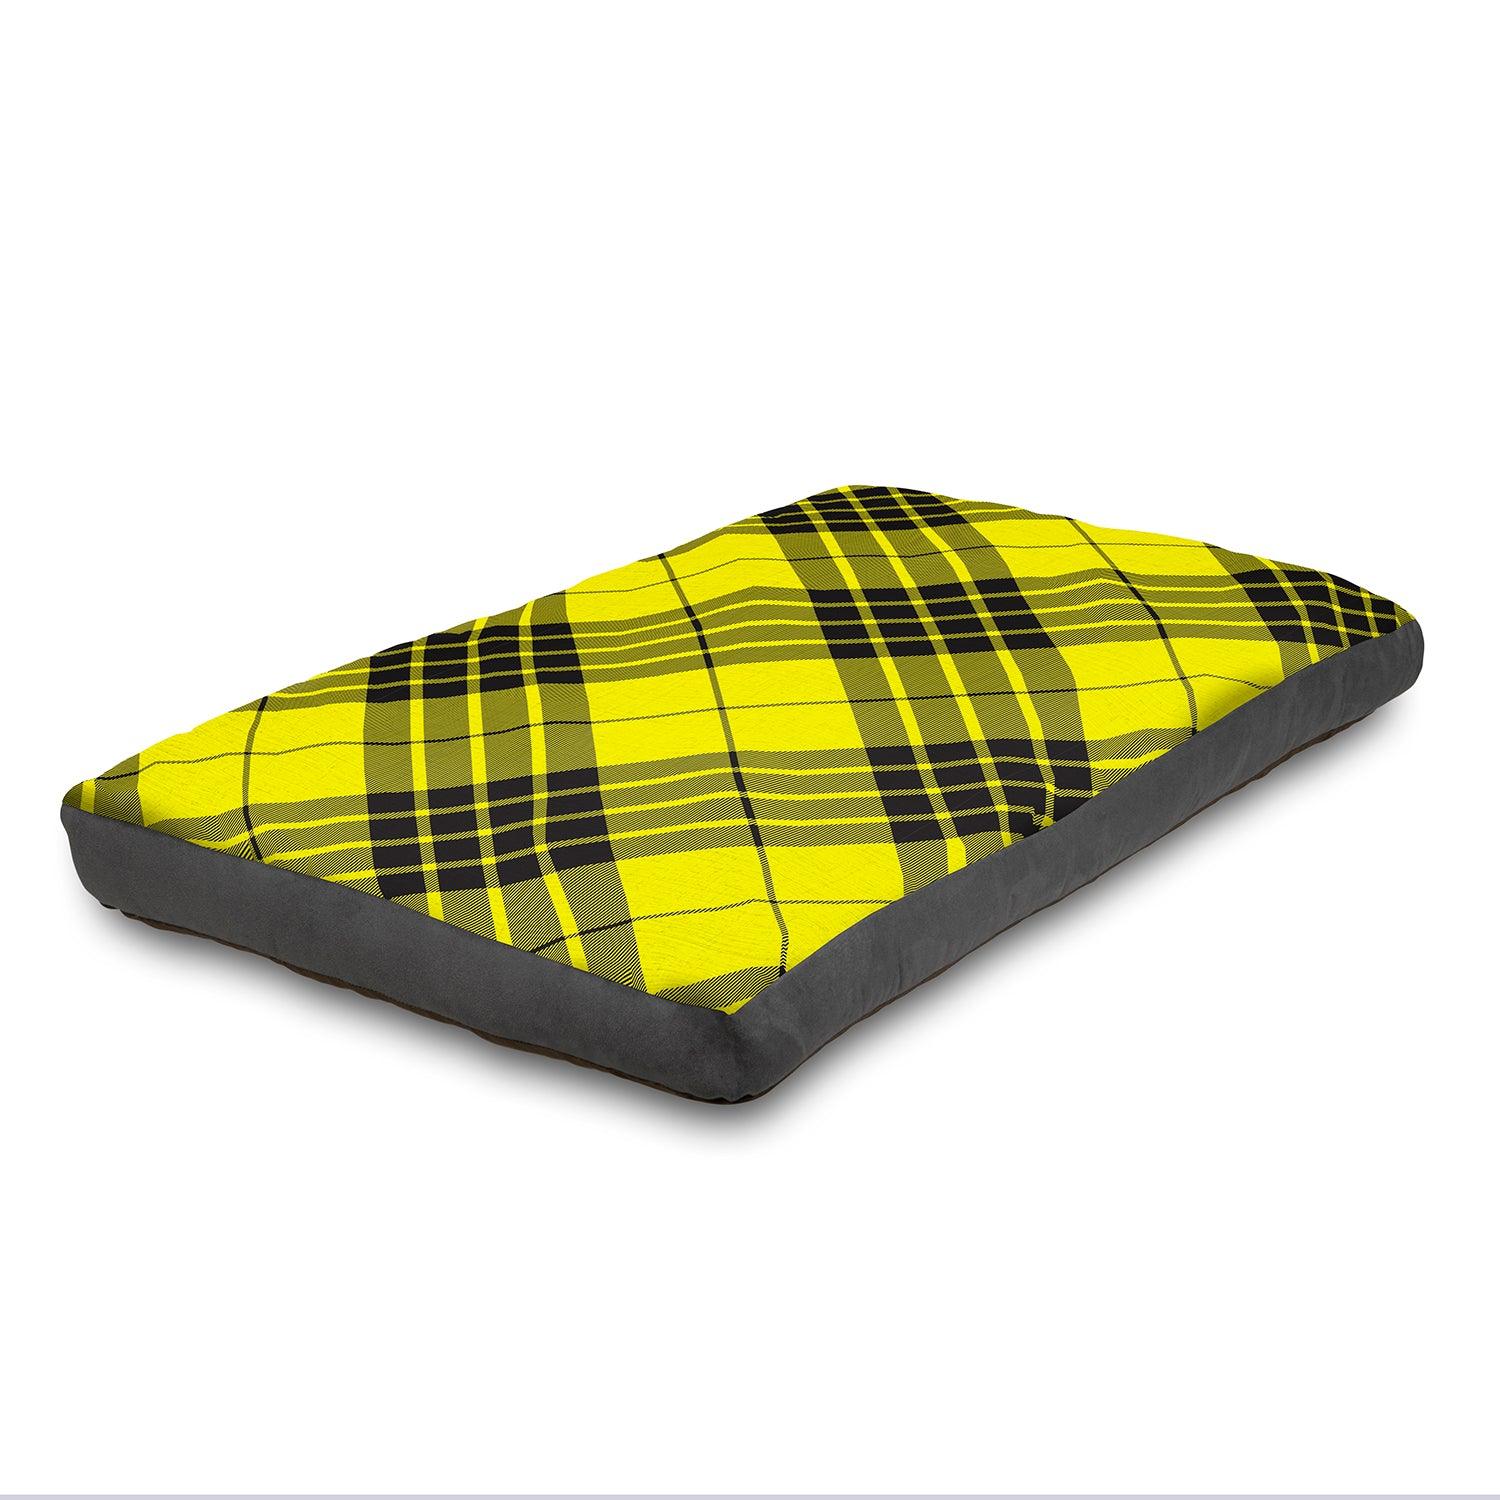 Super Comfy Dog Bed Soft and Fluffy with Washable Cover X-Large - 150 cm x 100 cm Dog Beds 